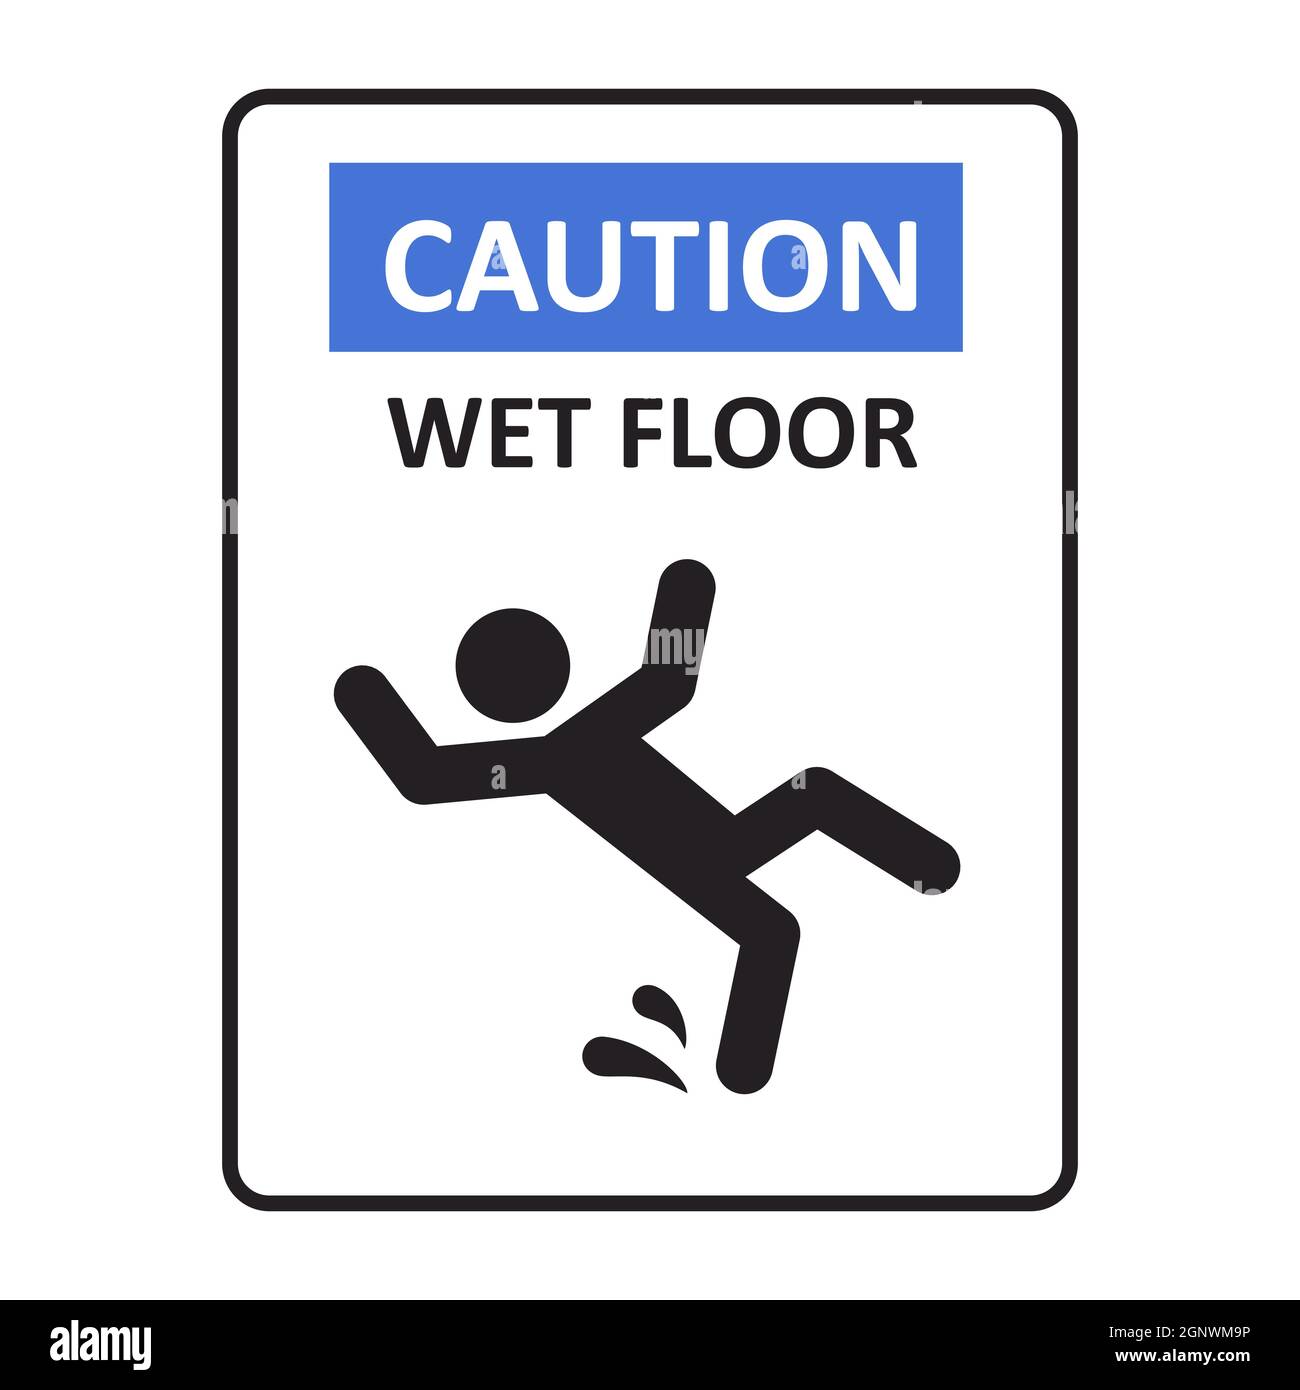 Caution wet floor sign. A man falling down. Slippery floor sign. A sign warning of danger. Vector illustration isolated on white background Stock Vector